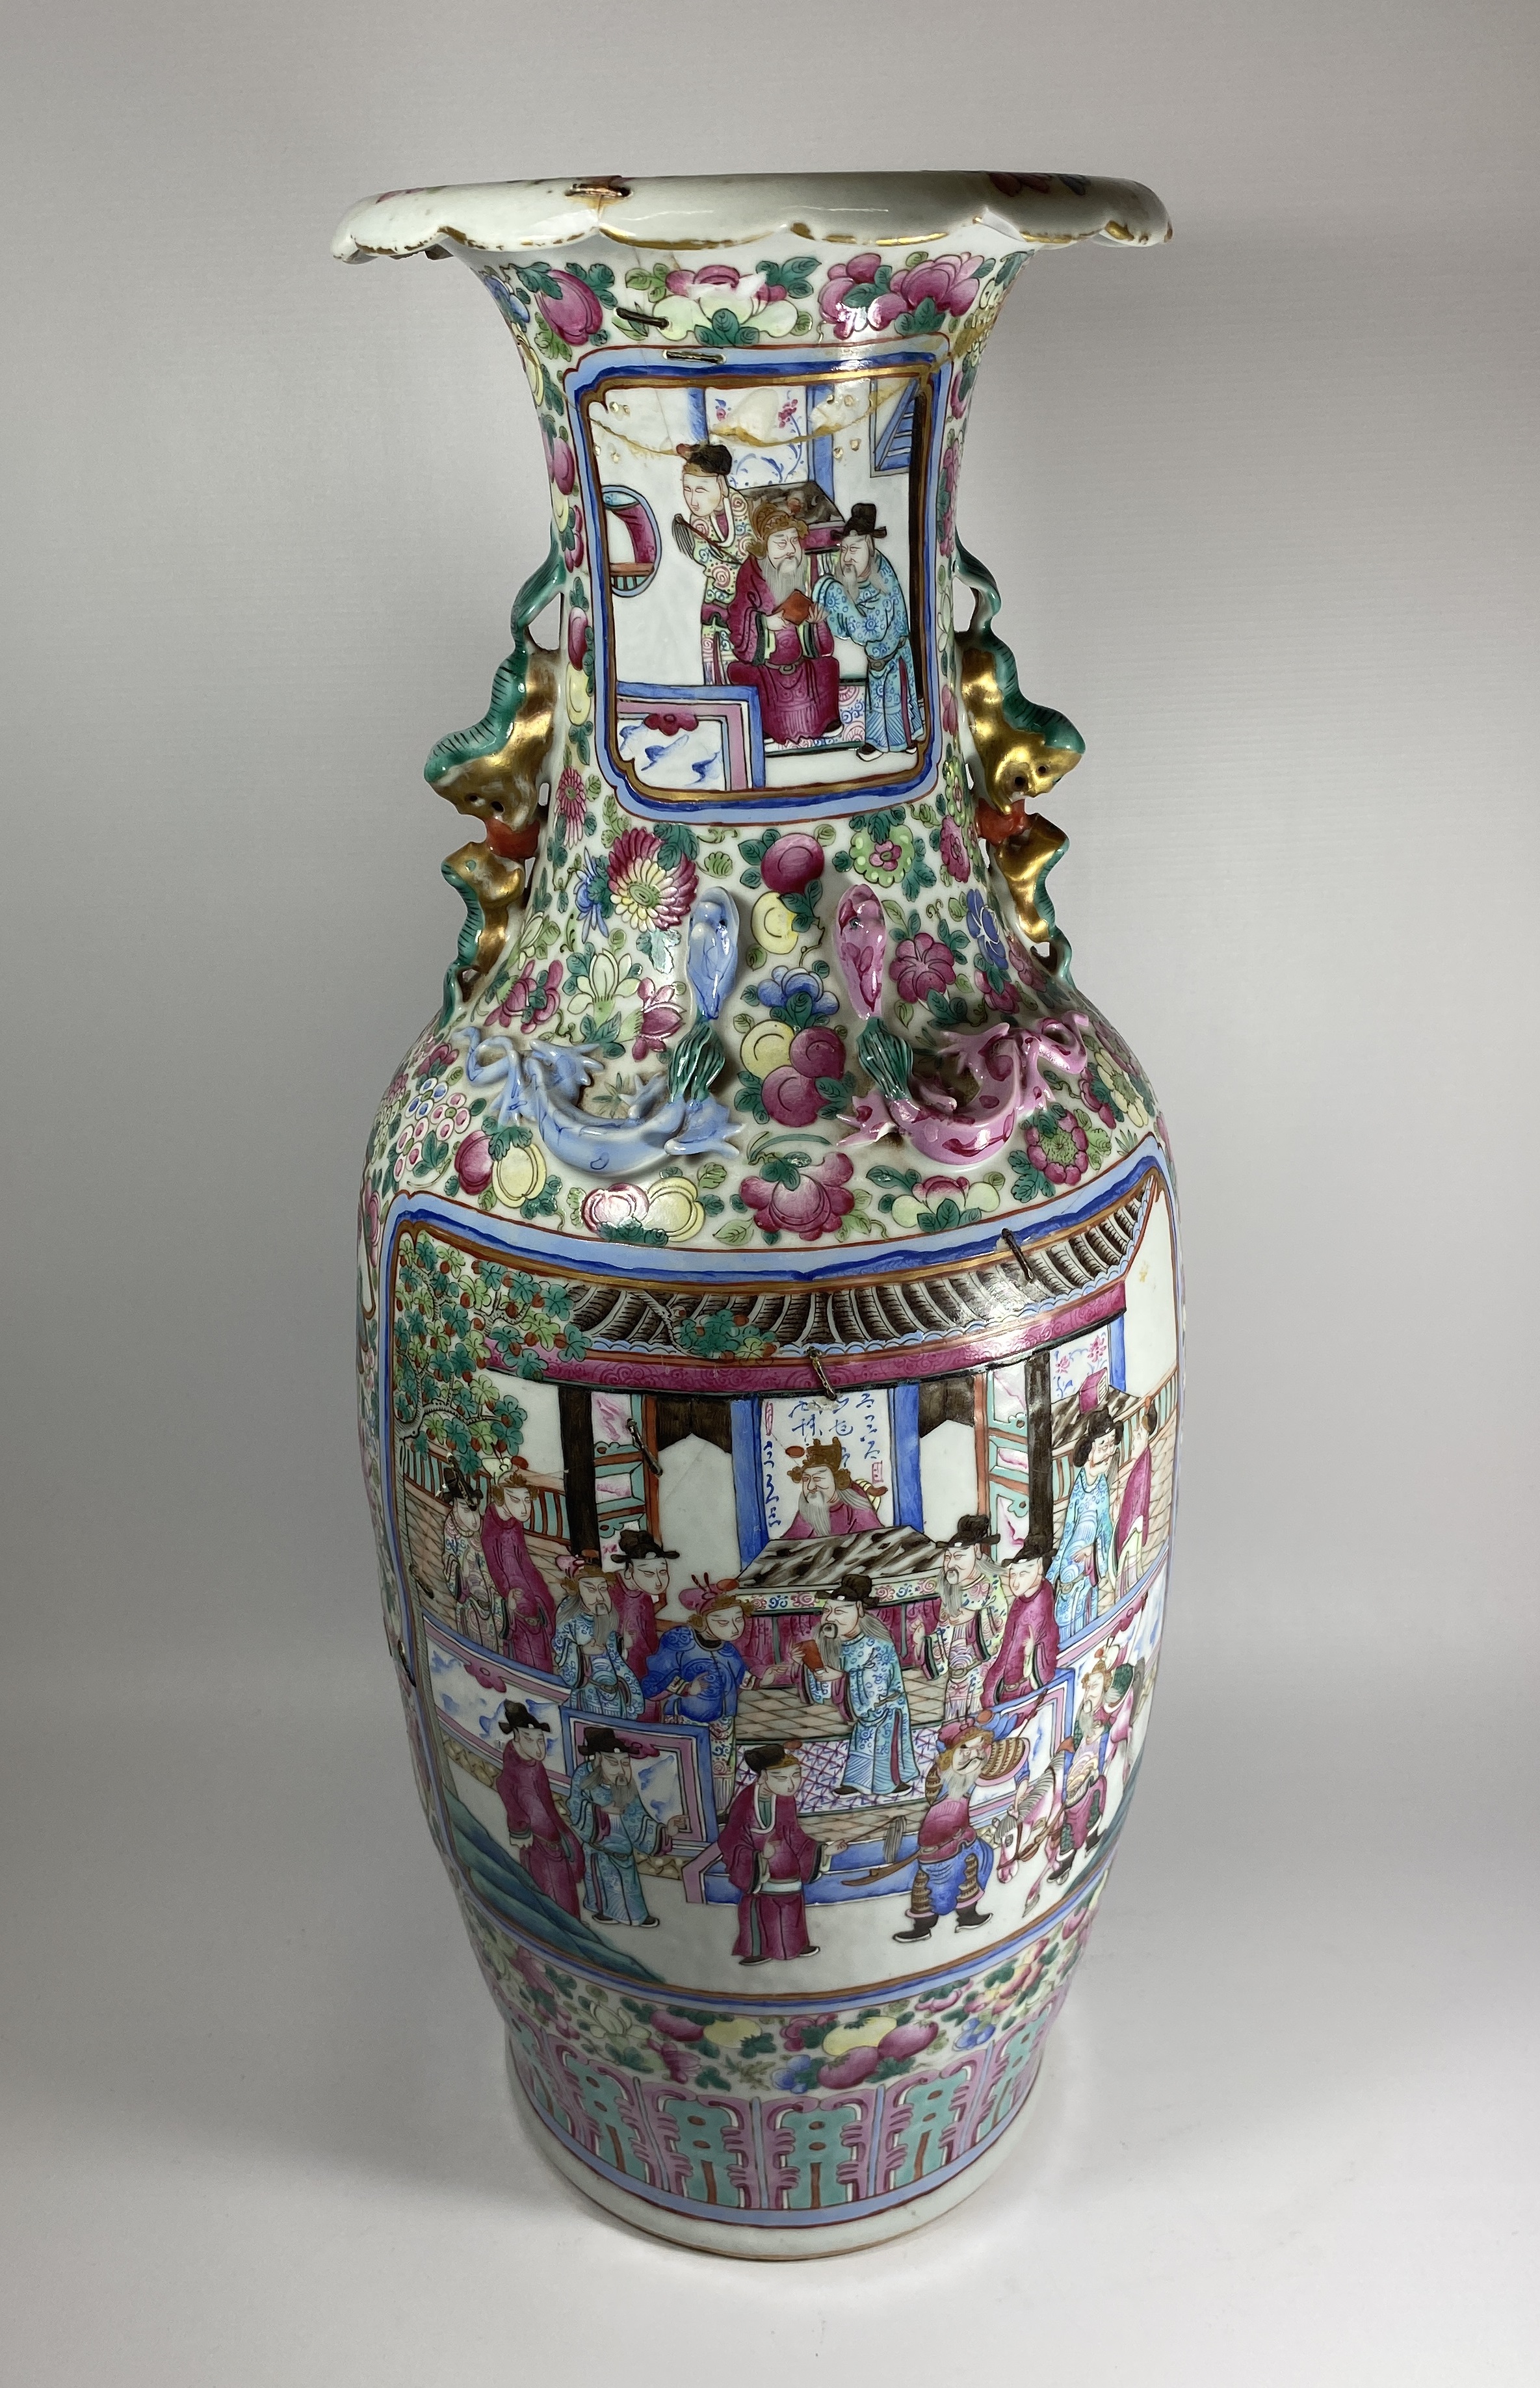 A LARGE MID-LATE 19TH CENTURY CHINESE FLOOR VASE WITH CEREMONIAL DESIGN PANELS, HEIGHT 63CM, (A/F)